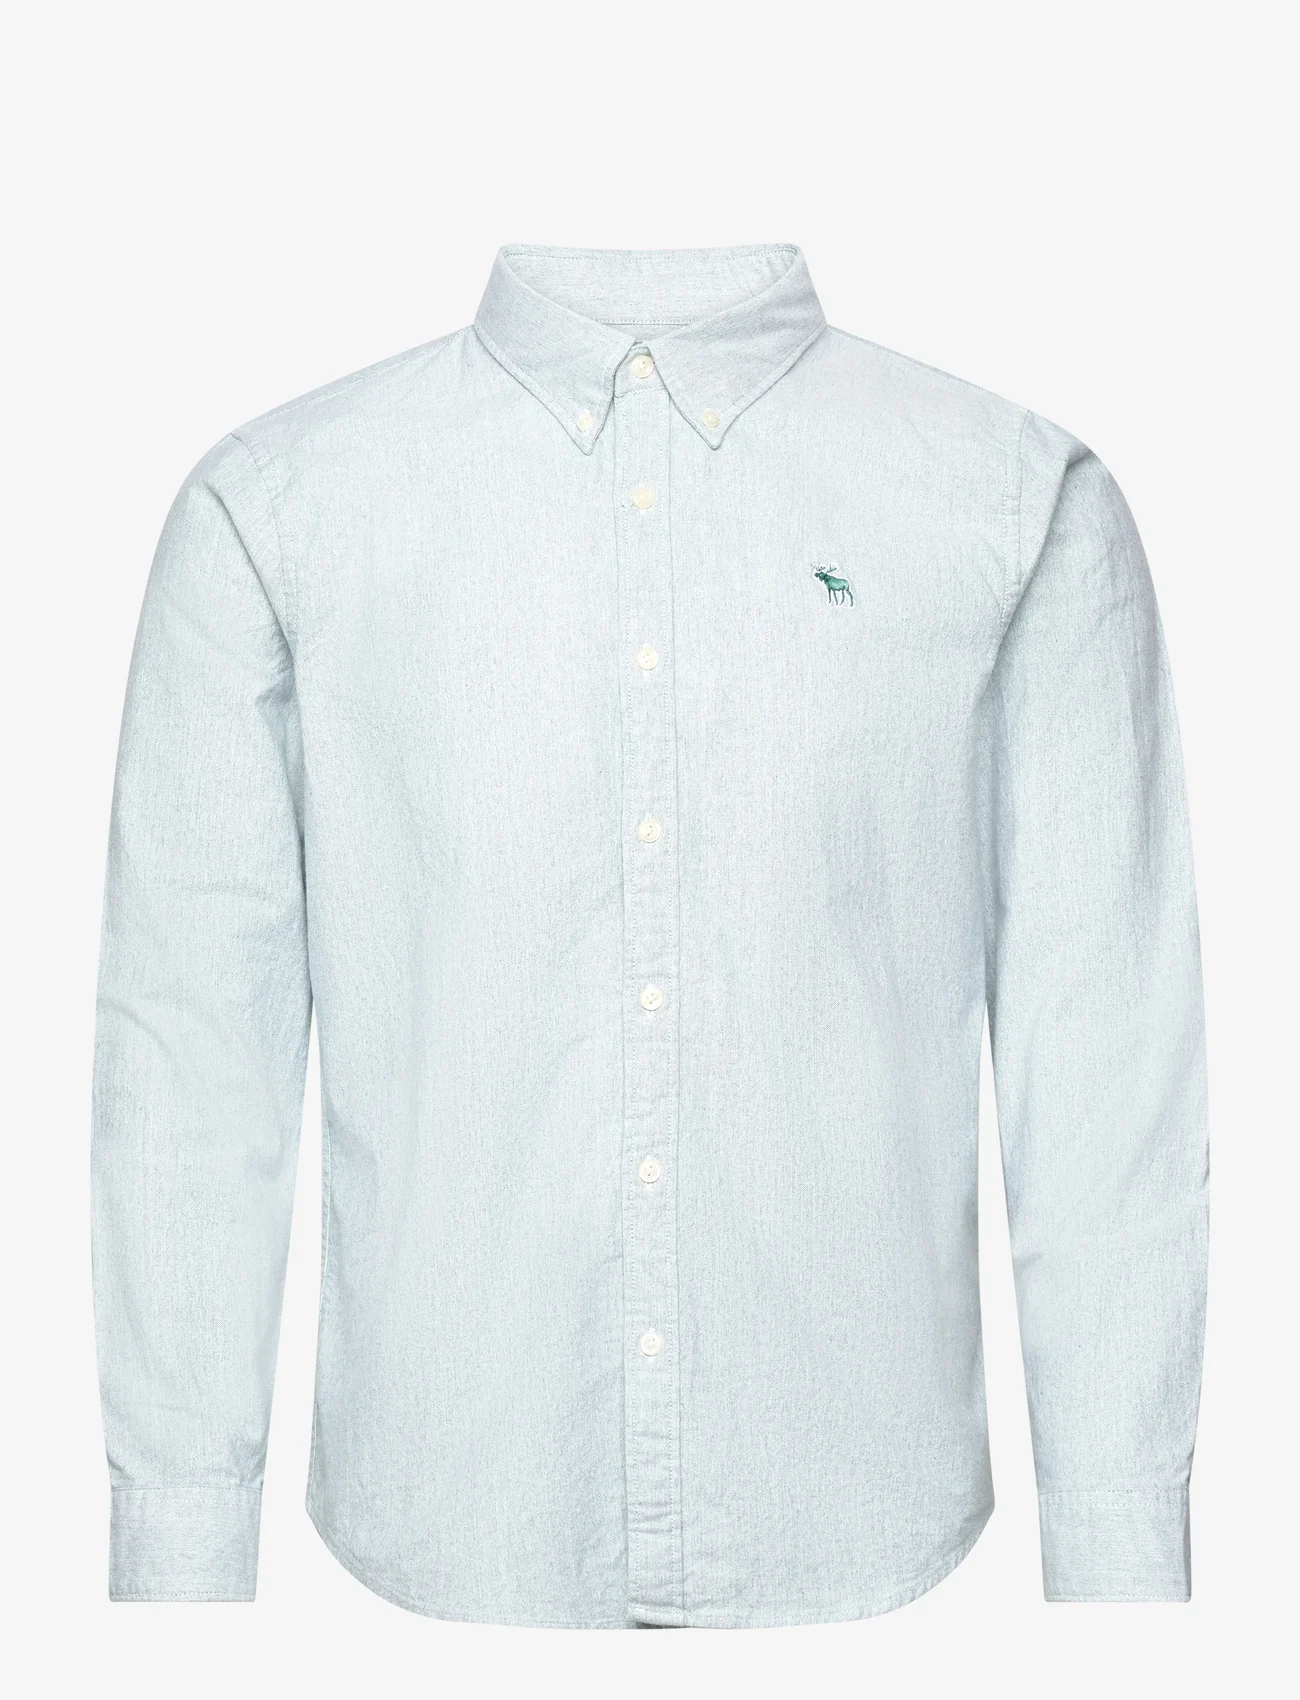 Abercrombie & Fitch - ANF MENS WOVENS - oxford shirts - blue spruce/white - 0